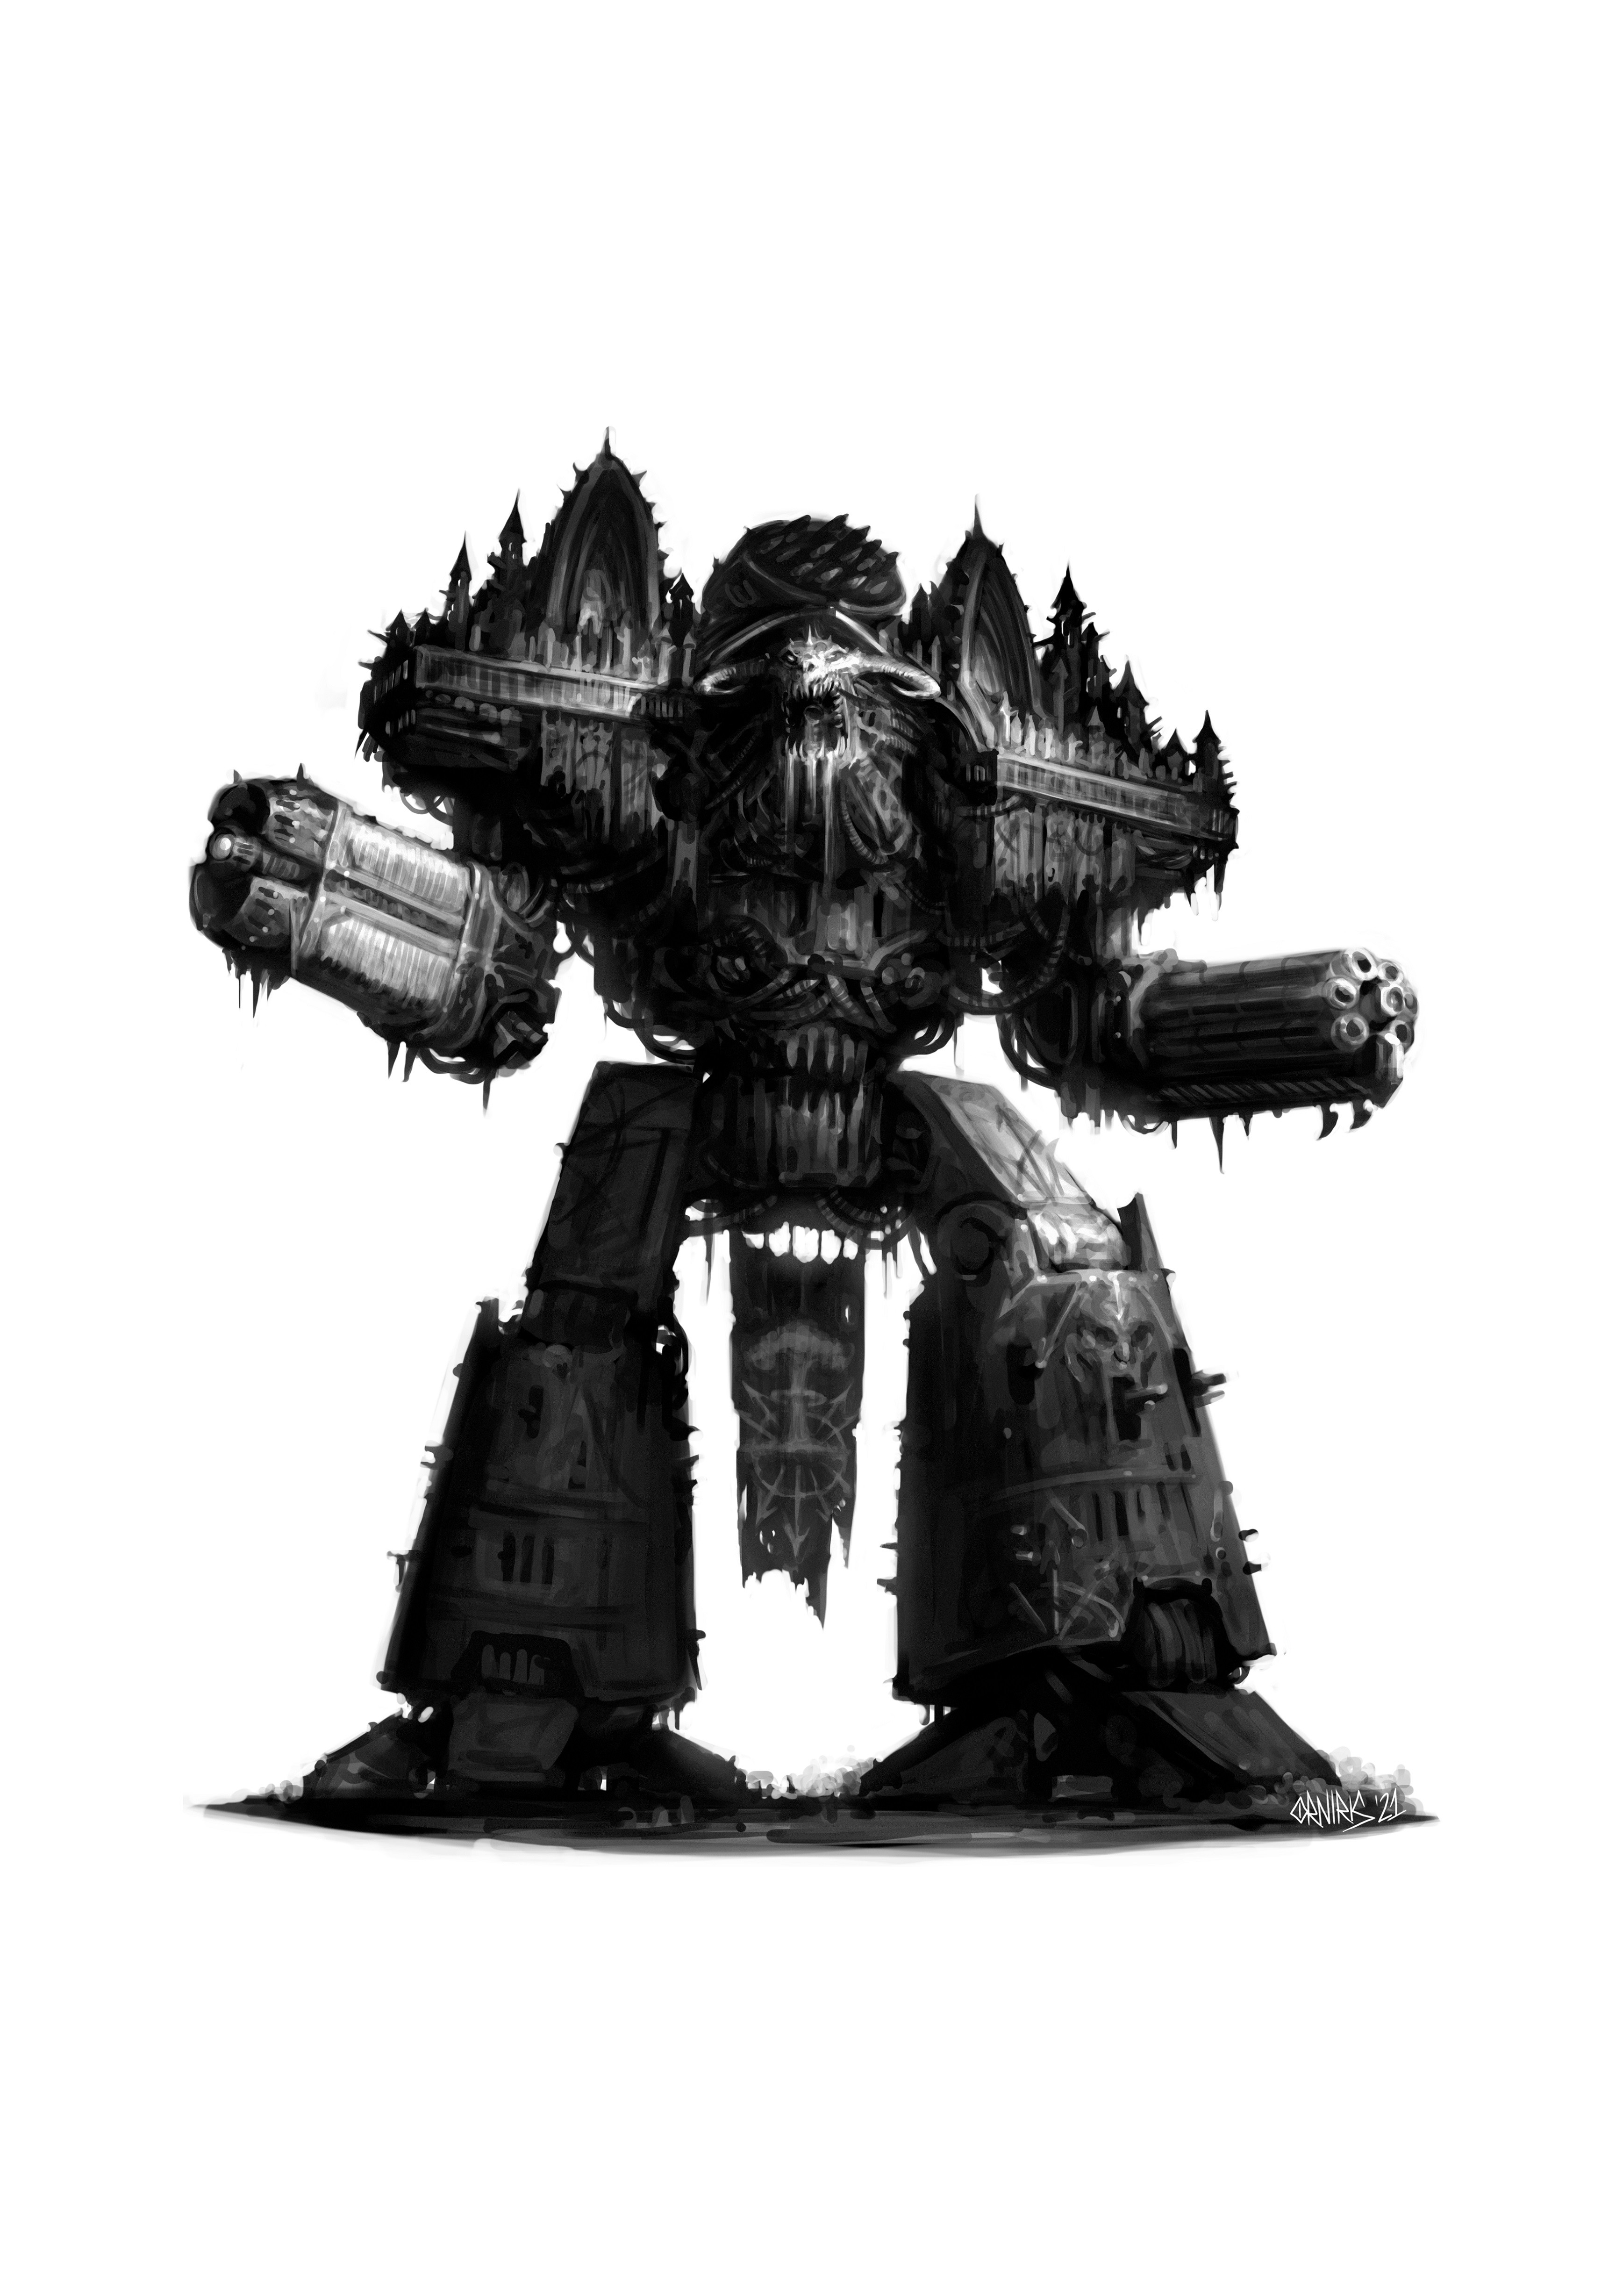 Warlord Class Titan - Art by Unknown Artists - 40K Gallery